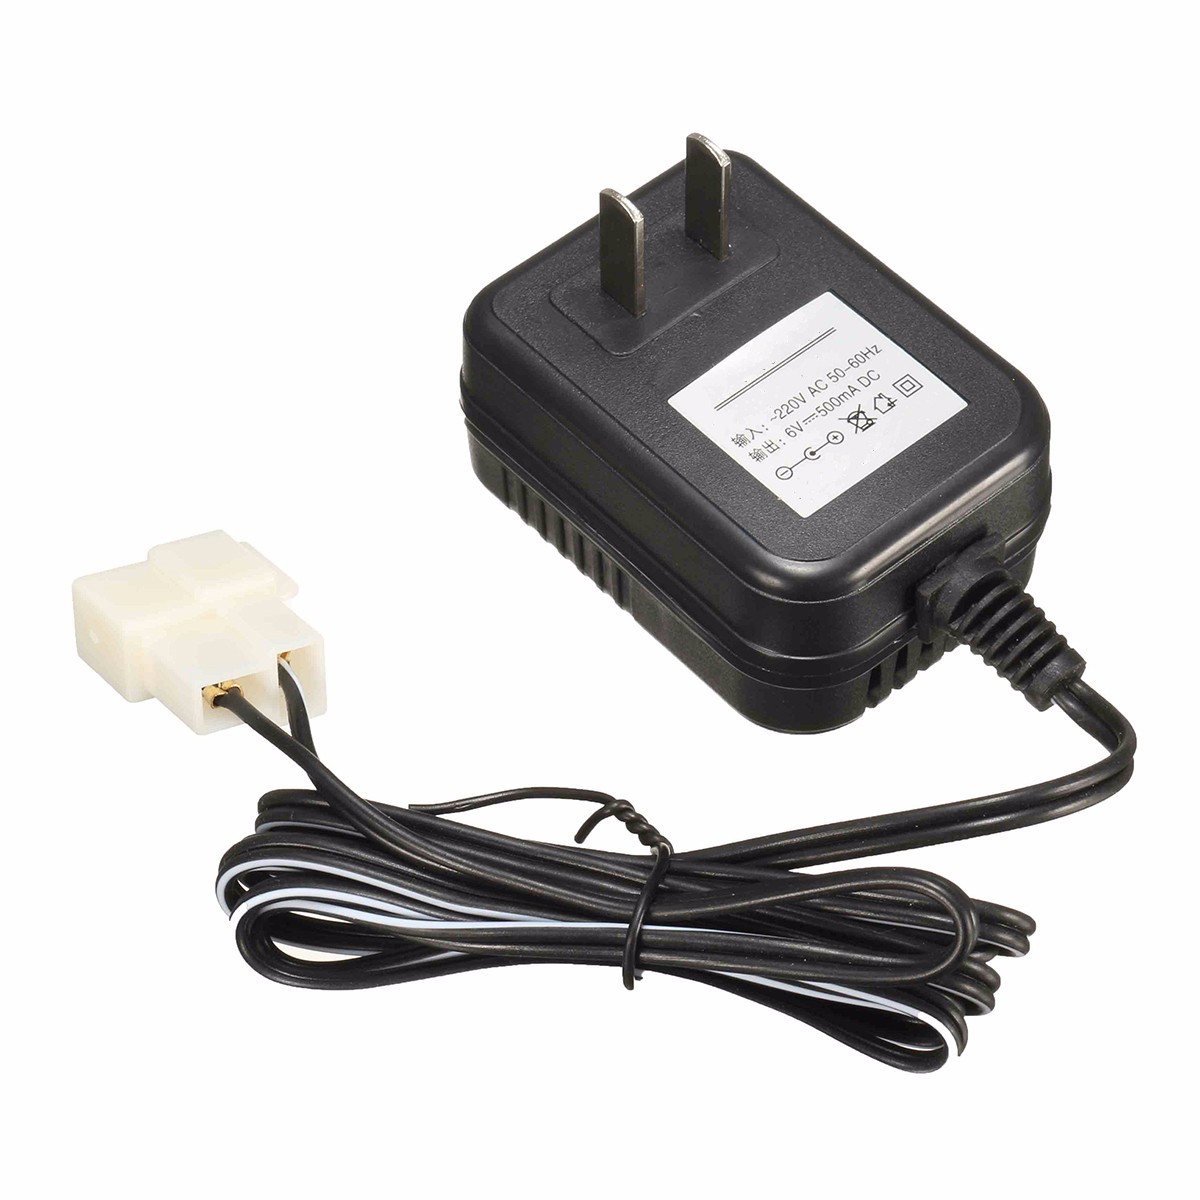 Wall-Charger-AC-Adapter-for-KID-TRAX-ATV-Quad-6V-Battery-Powered-Ride-1363257-5